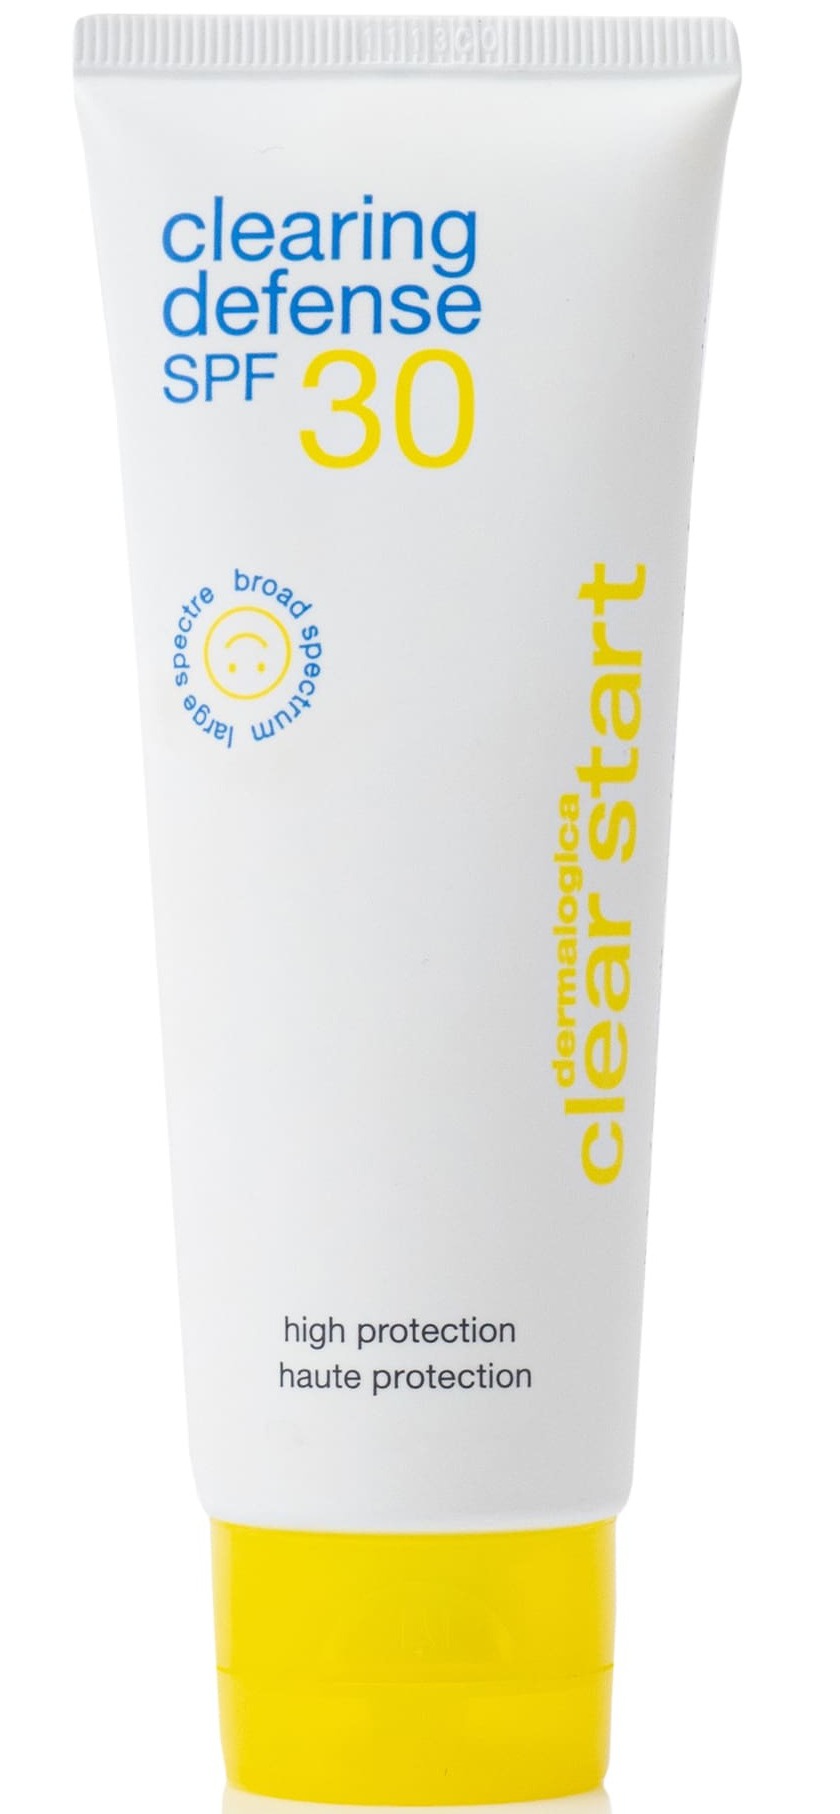 CLEARSTART Clearing Defense SPF30